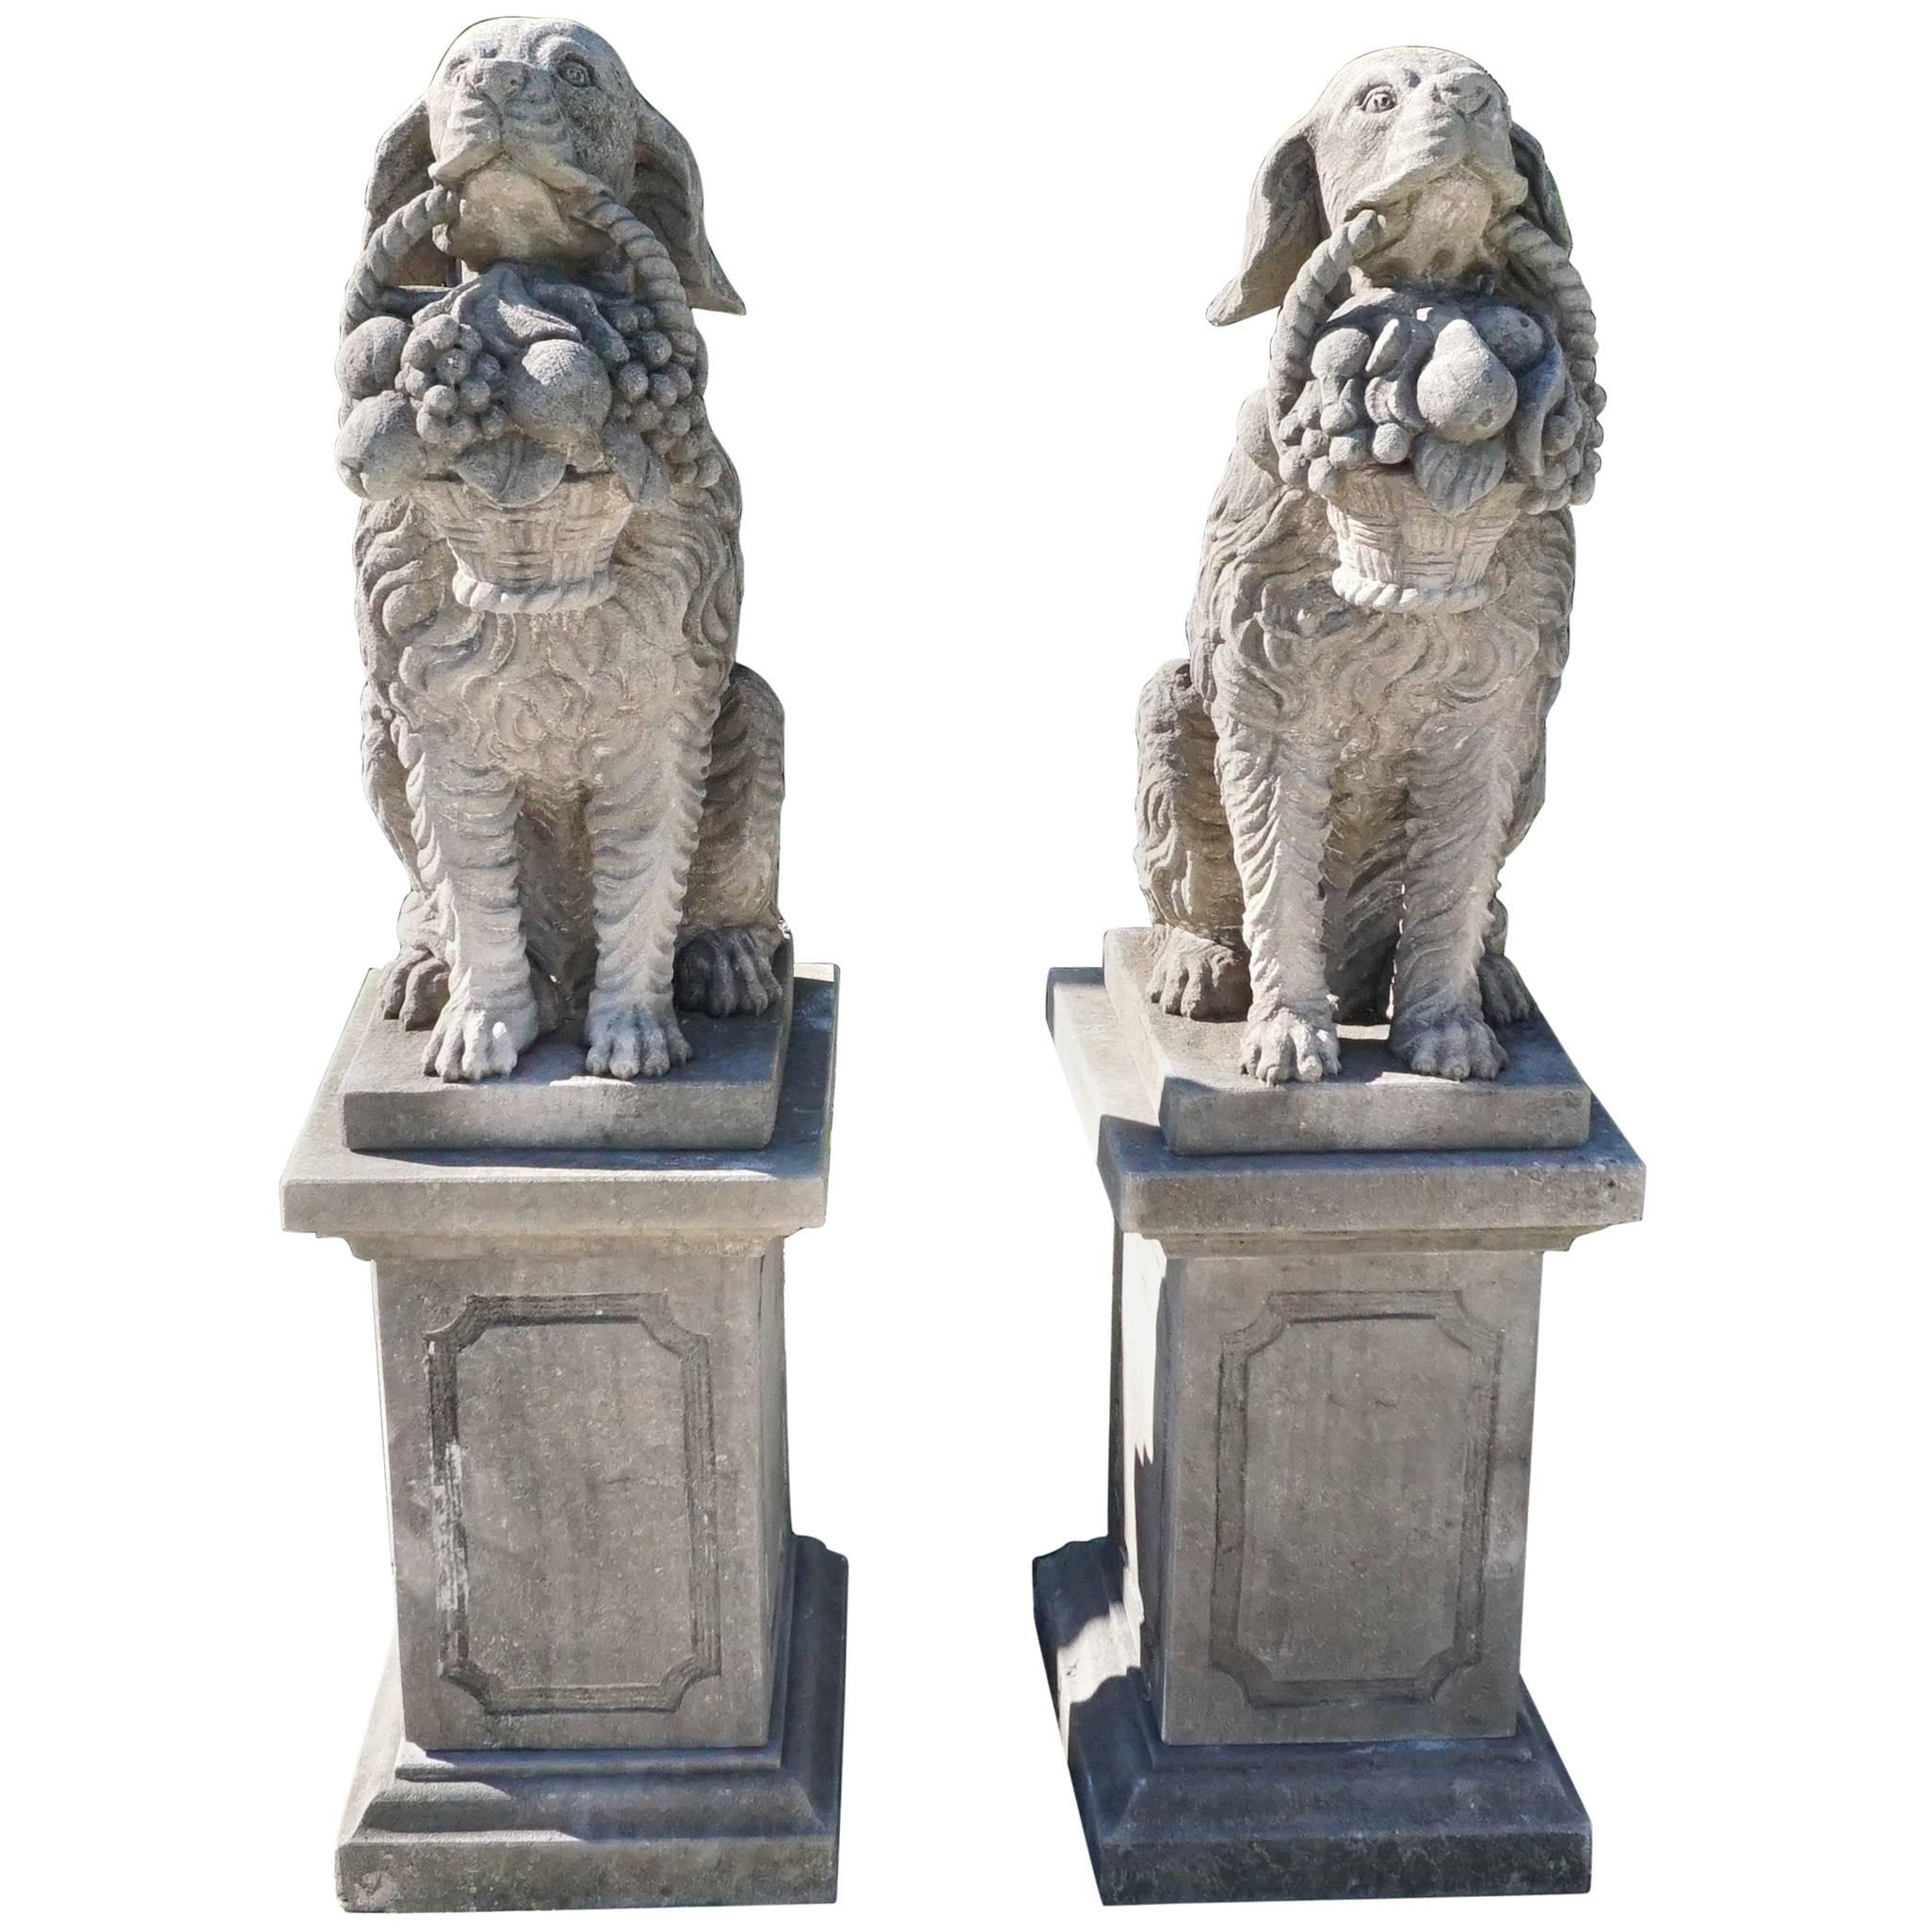 Early 20th Century, a Pair of Tuscan Hunting Dogs in Limestone